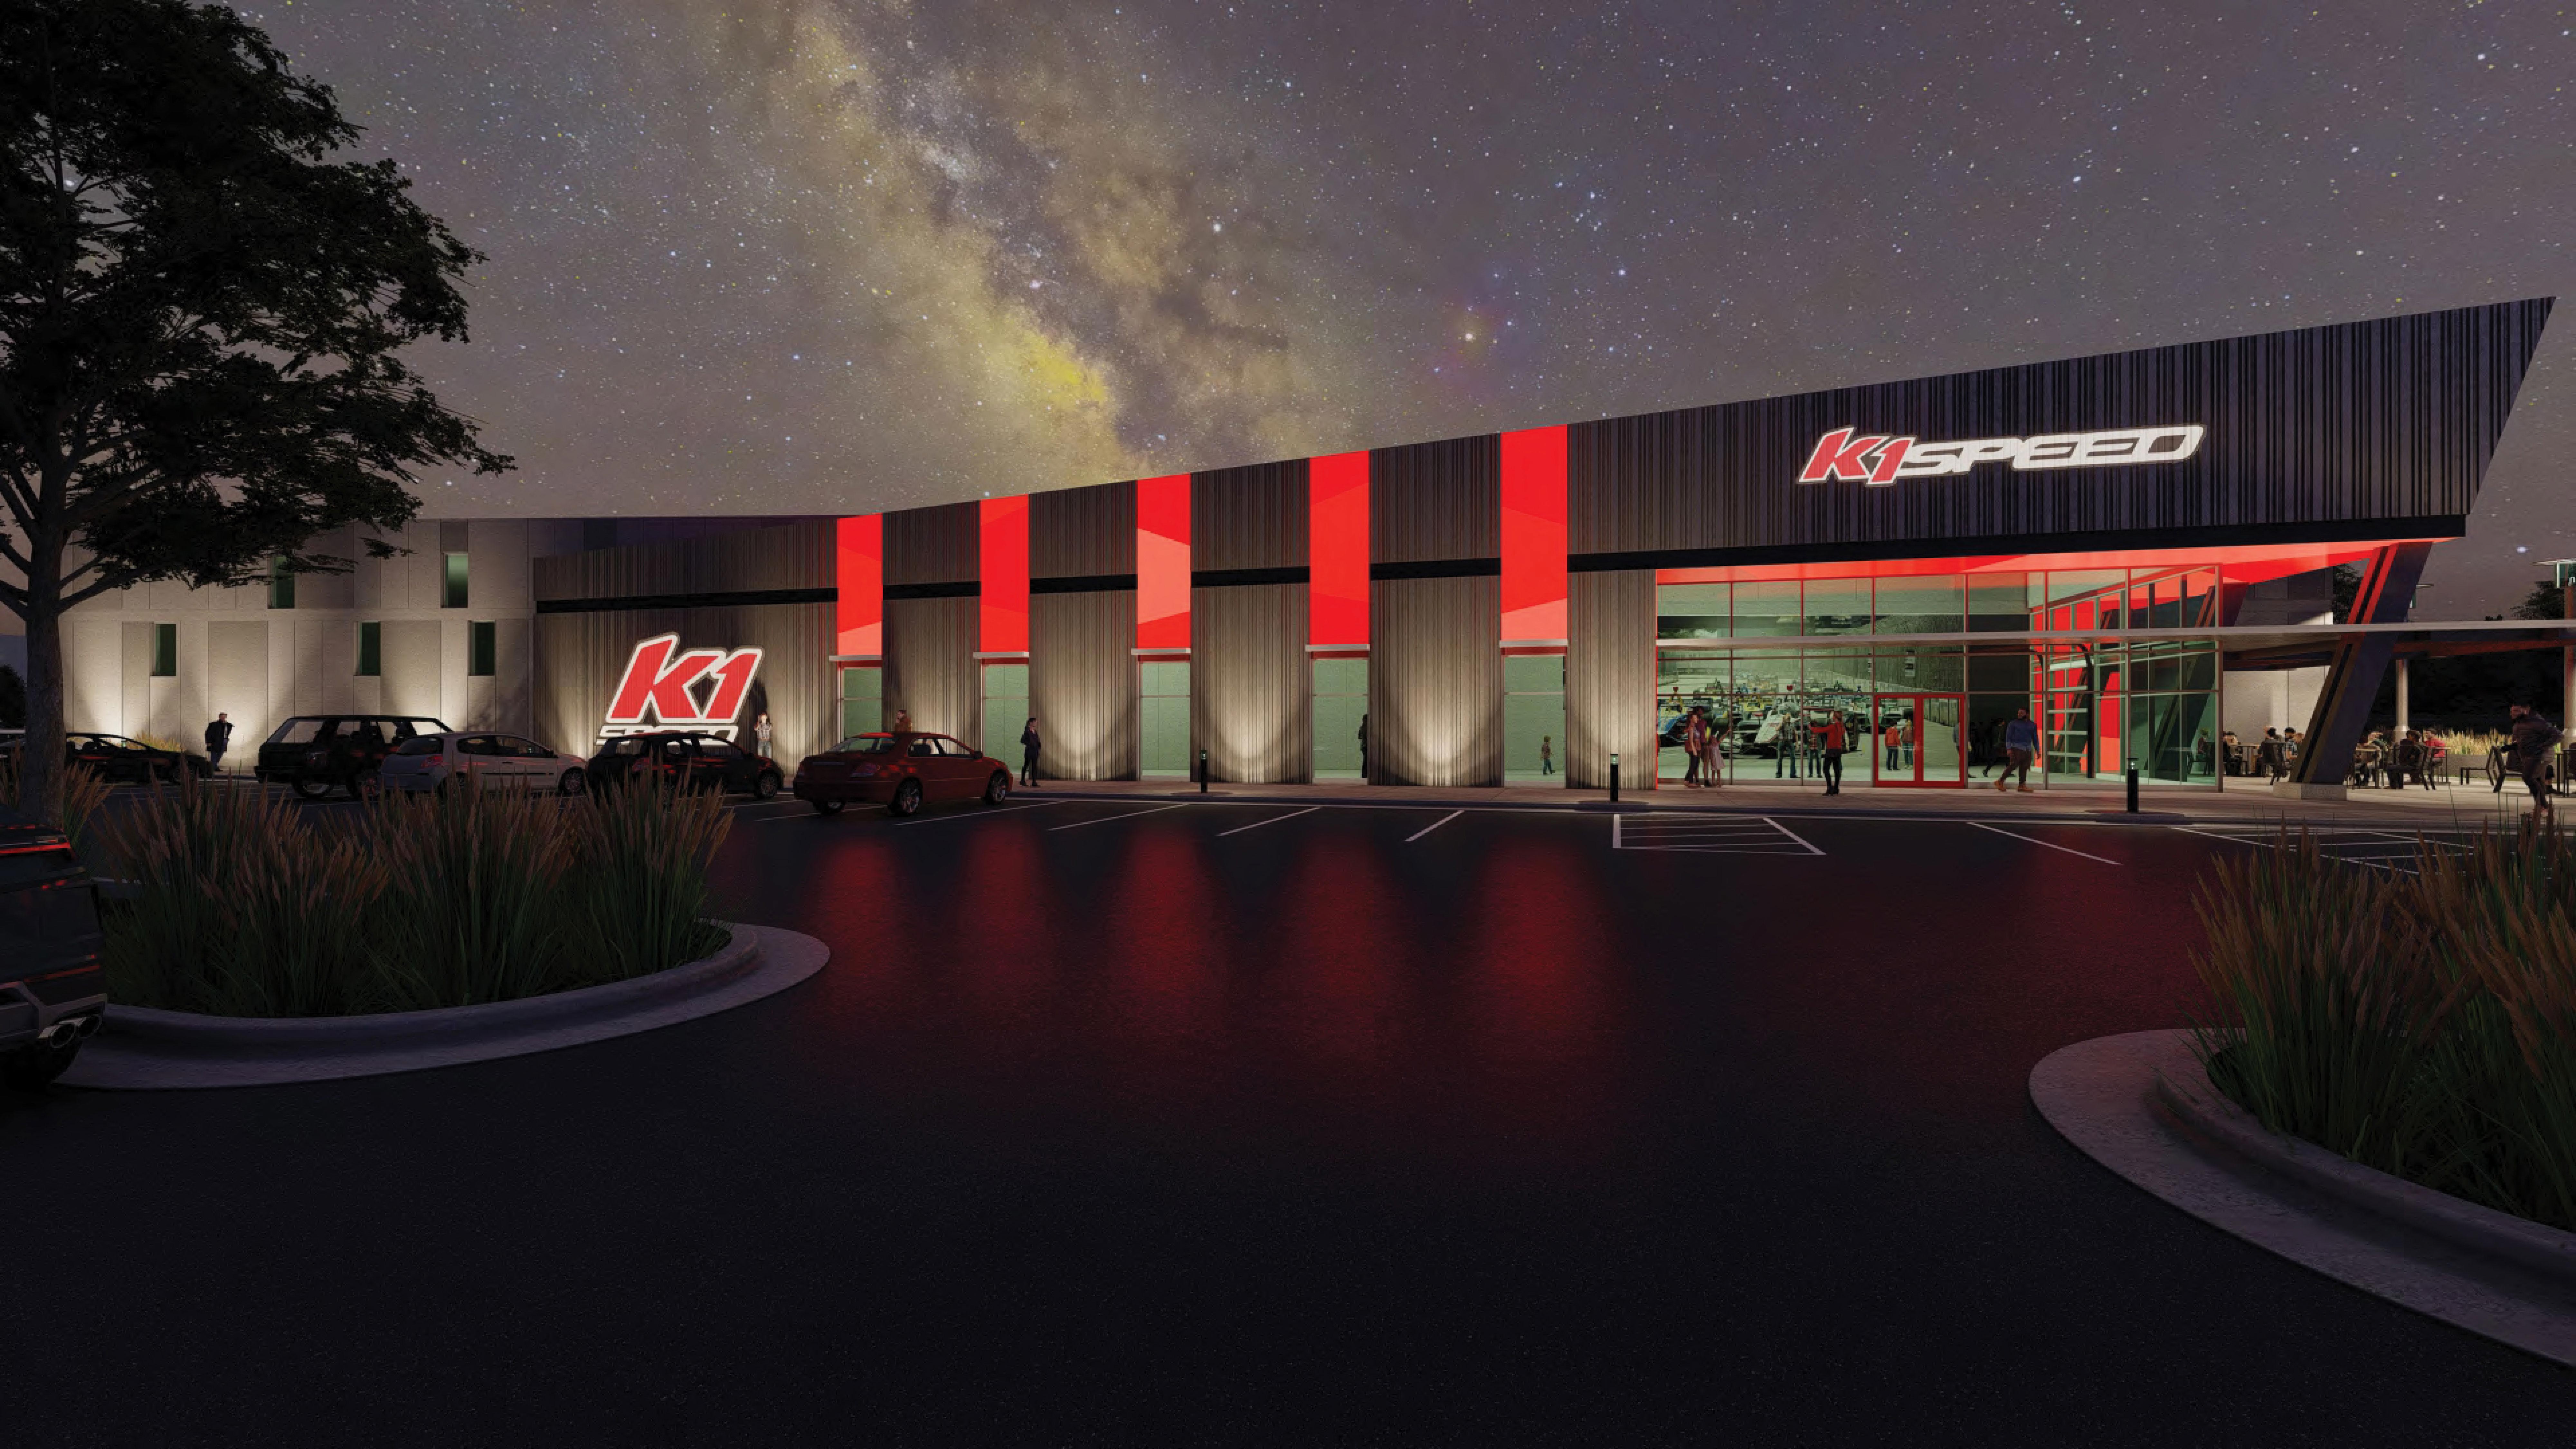 A concept rendering of K1 Speed Lee's Summit at night